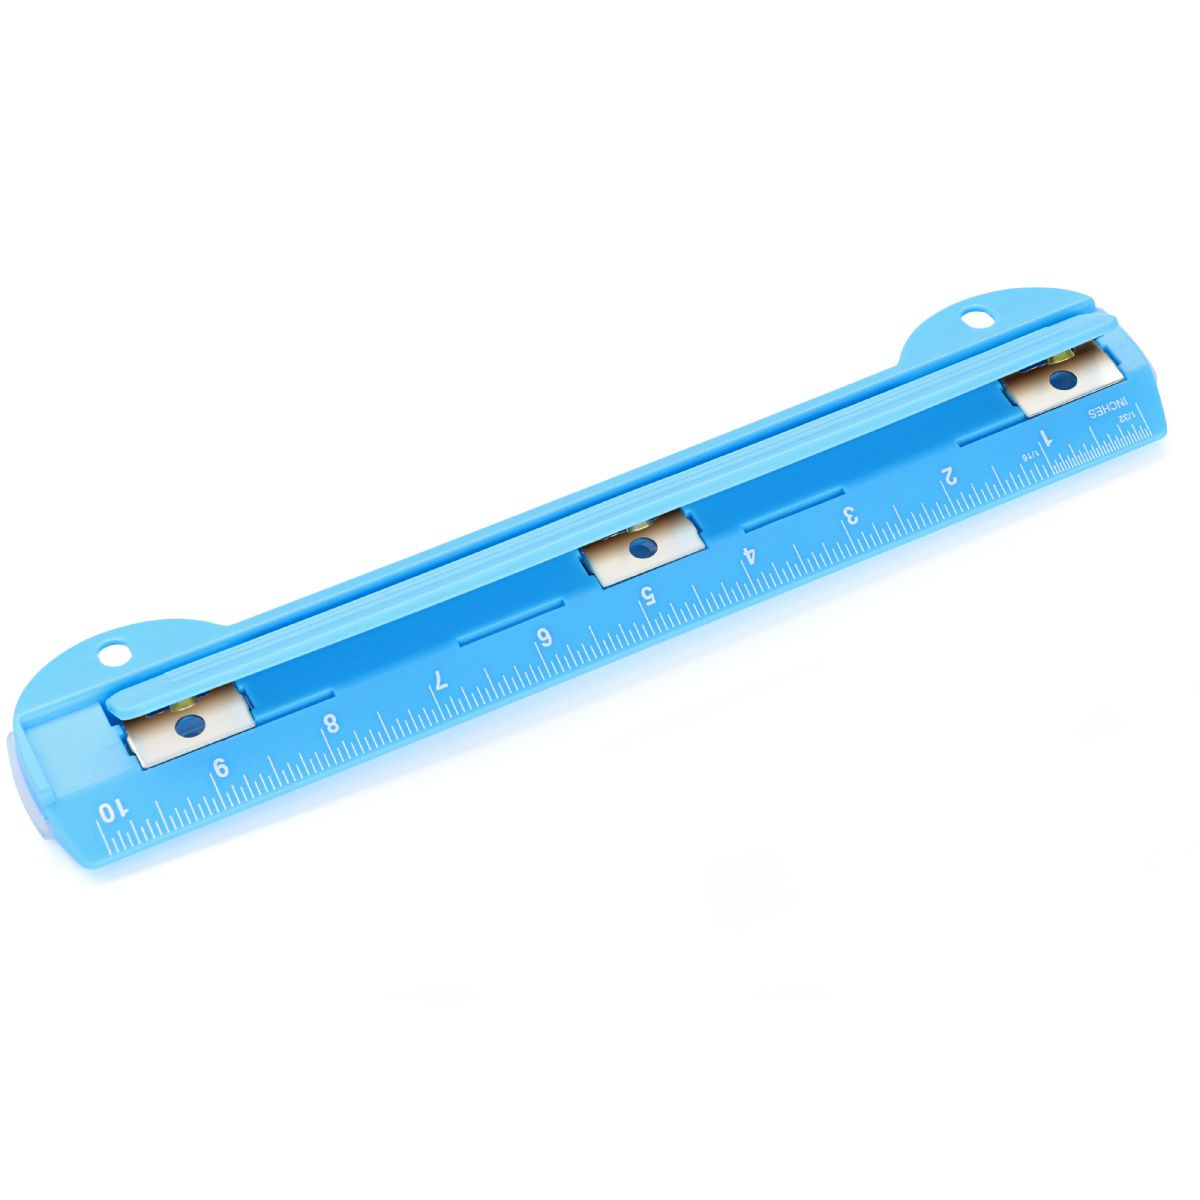 12 Pieces of Portable 3-Hole Paper Punch, Blue